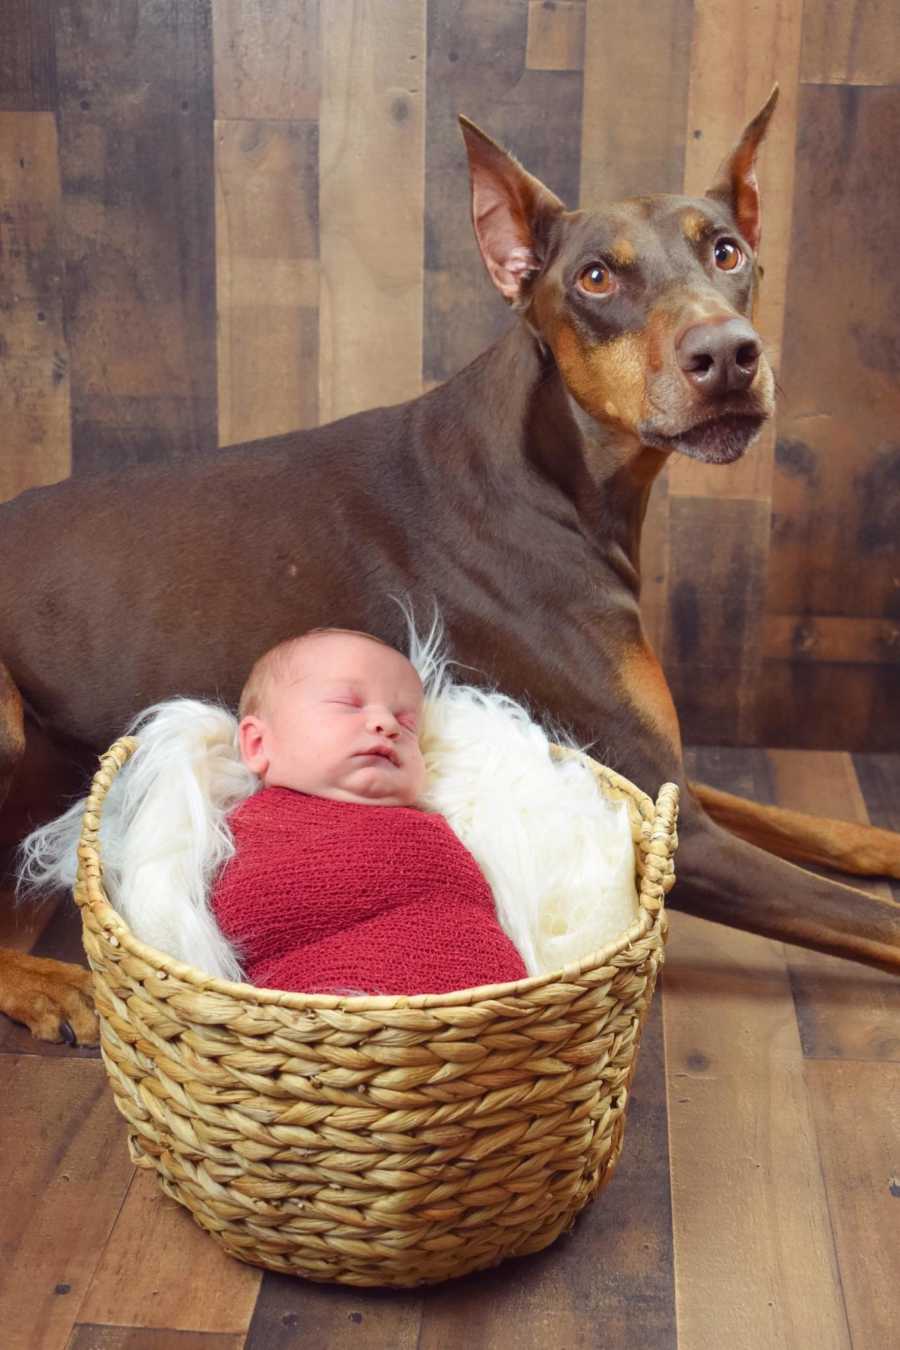 Dog laying on ground behind baby that is swaddled in red blanket sitting in basket for photoshoot